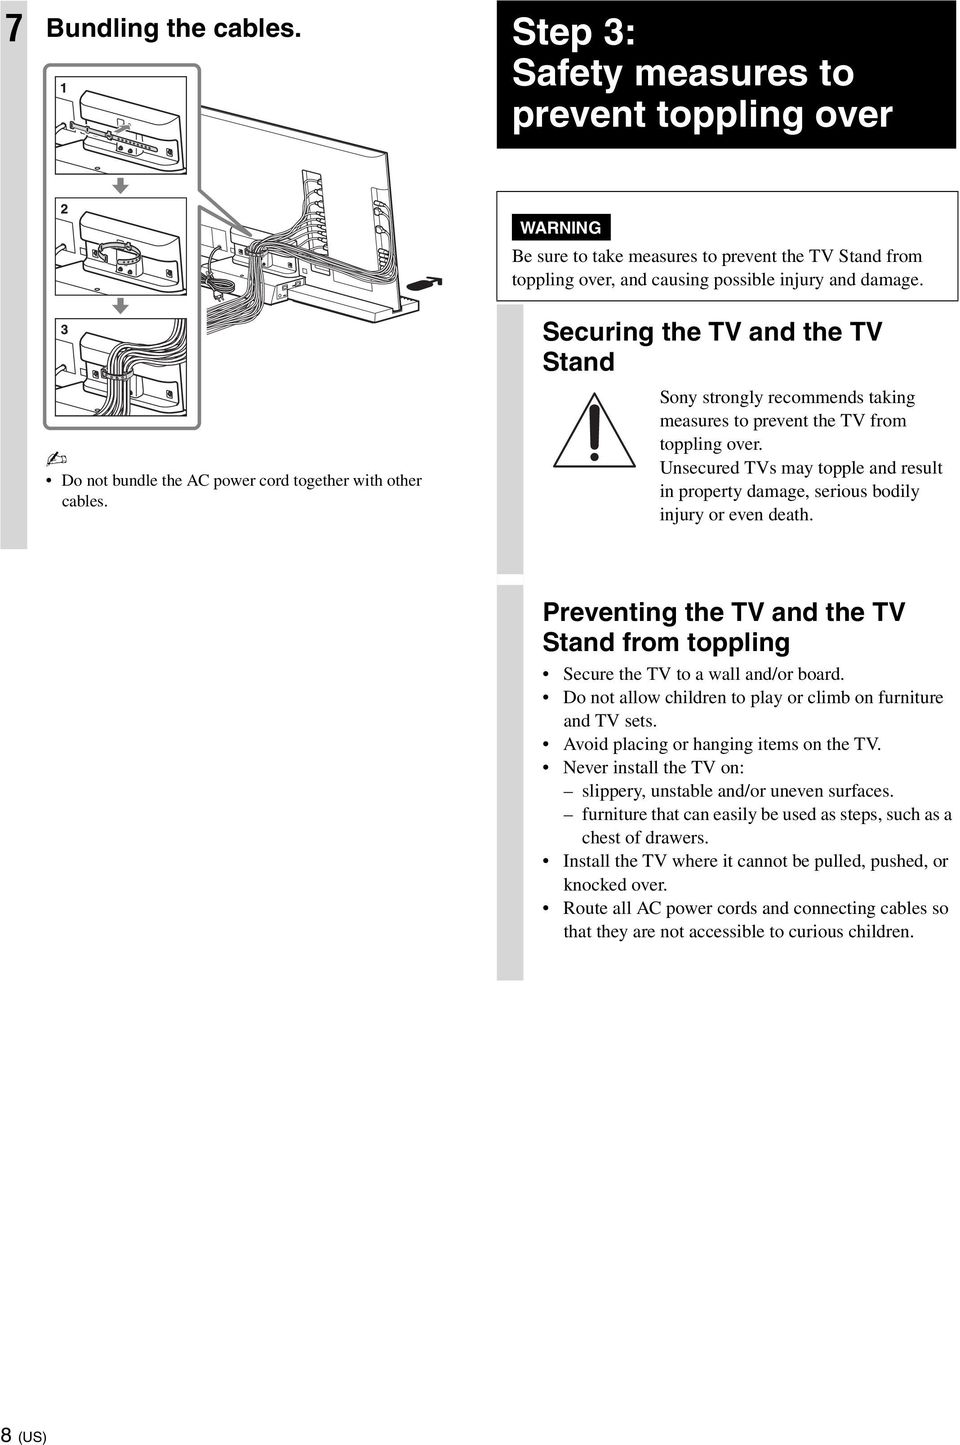 Unsecured TVs may topple and result in property damage, serious bodily injury or even death. Preventing the TV and the TV Stand from toppling Secure the TV to a wall and/or board.